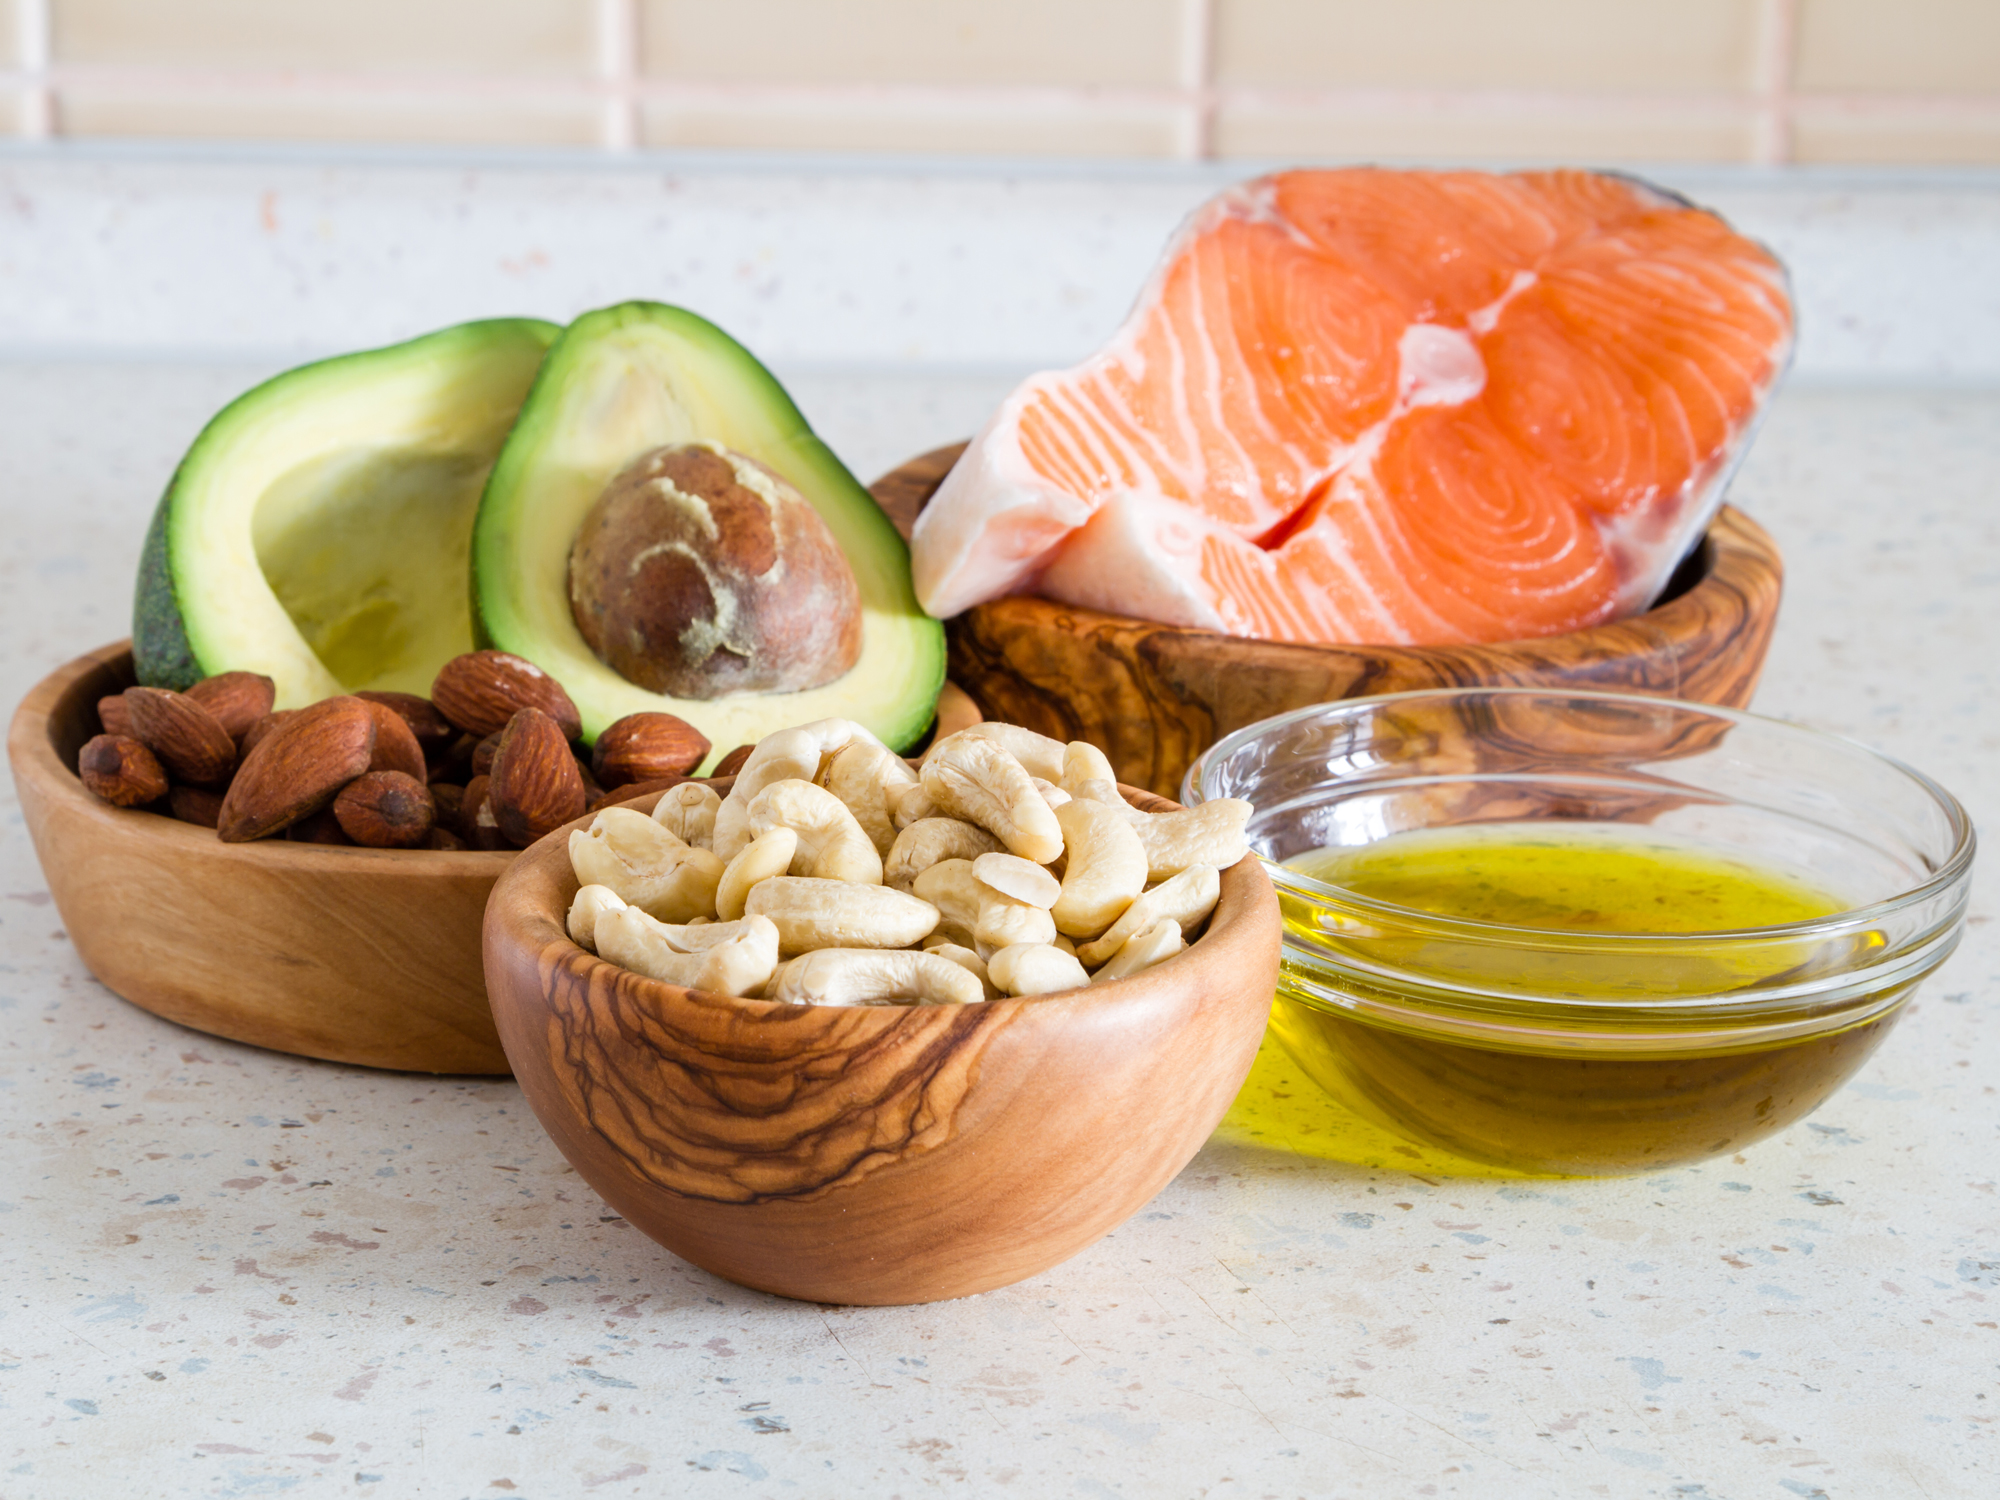 How to find your healthy fats ‘sweet spot’